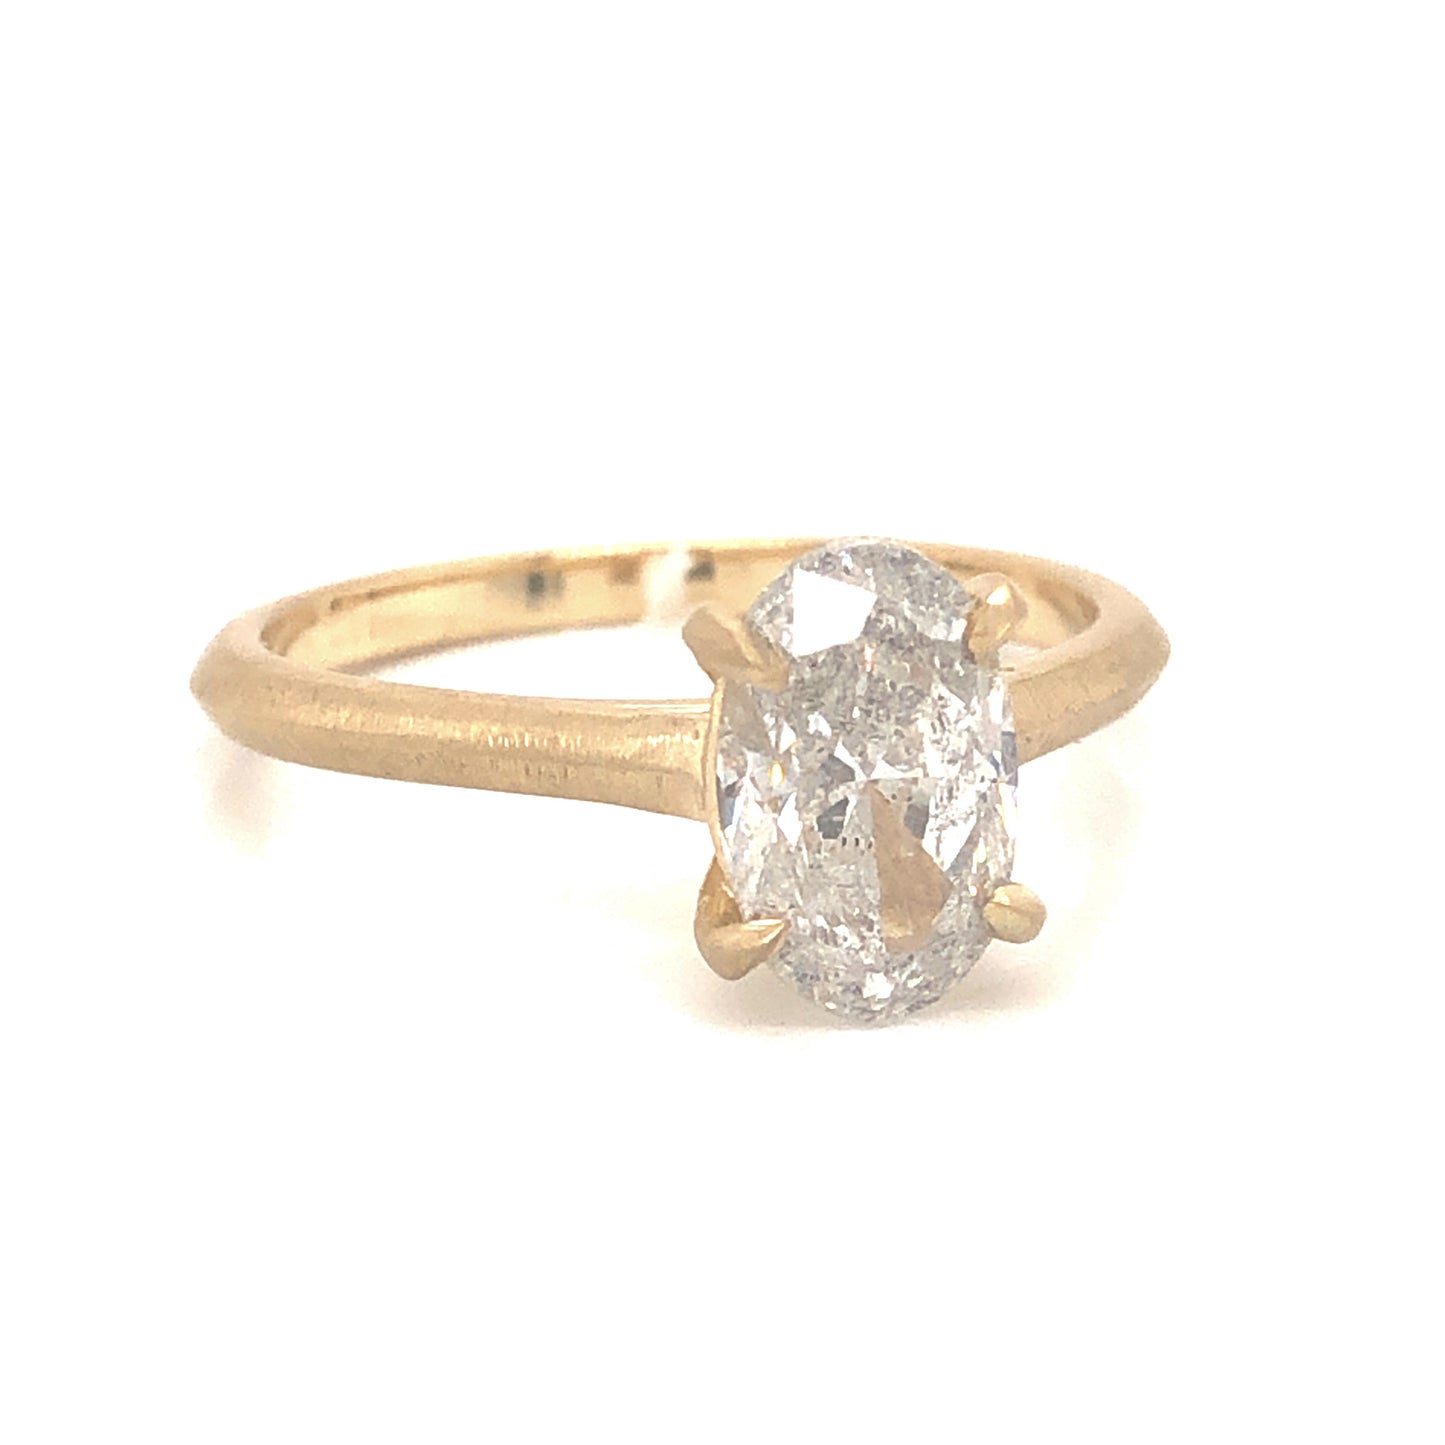 1.41 Rustic Oval Diamond Engagement Ring in 14k Yellow Gold